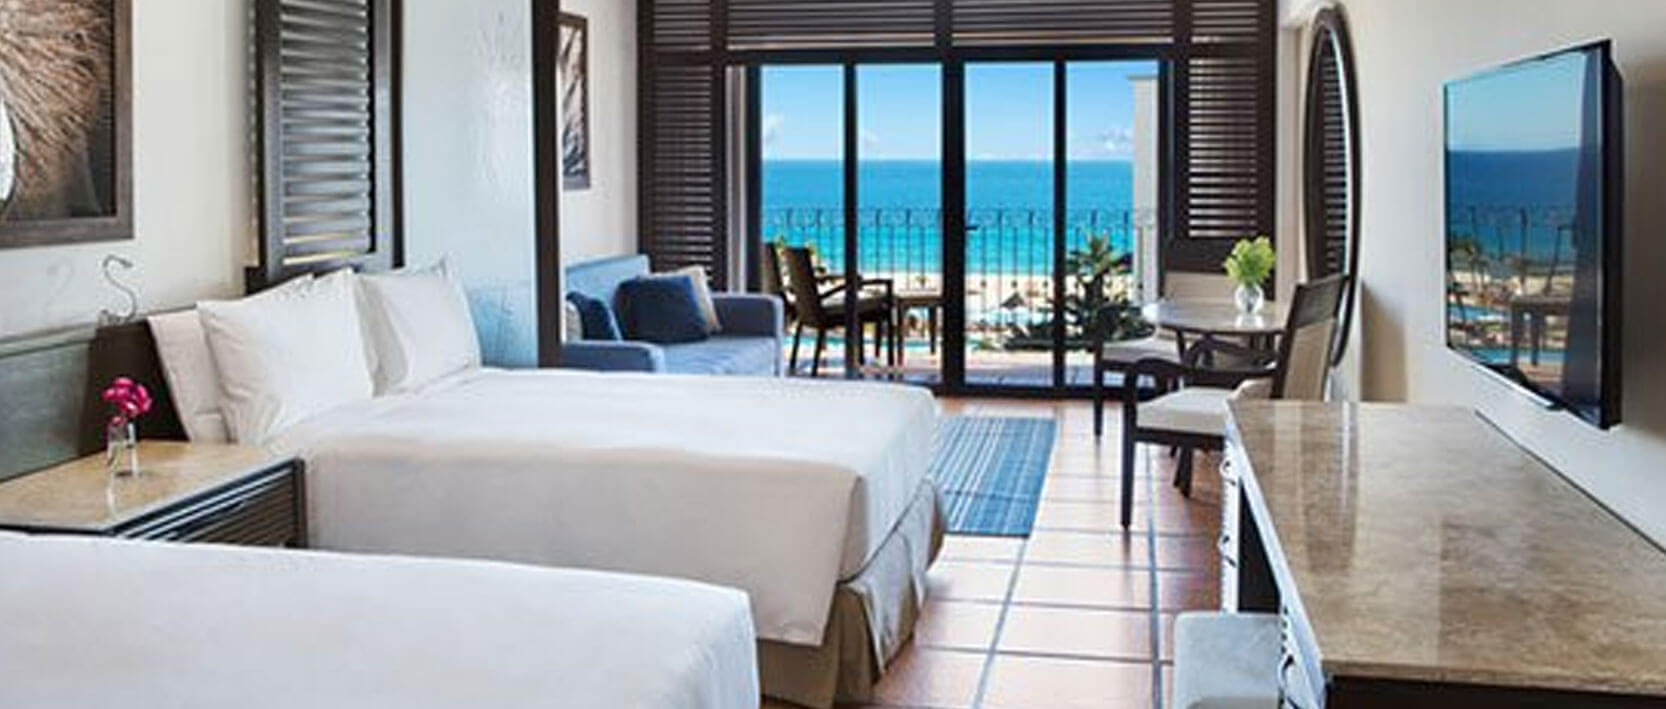 Hyatt Ziva Los Cabos Accommodations - Club Ocean View Master King or Double